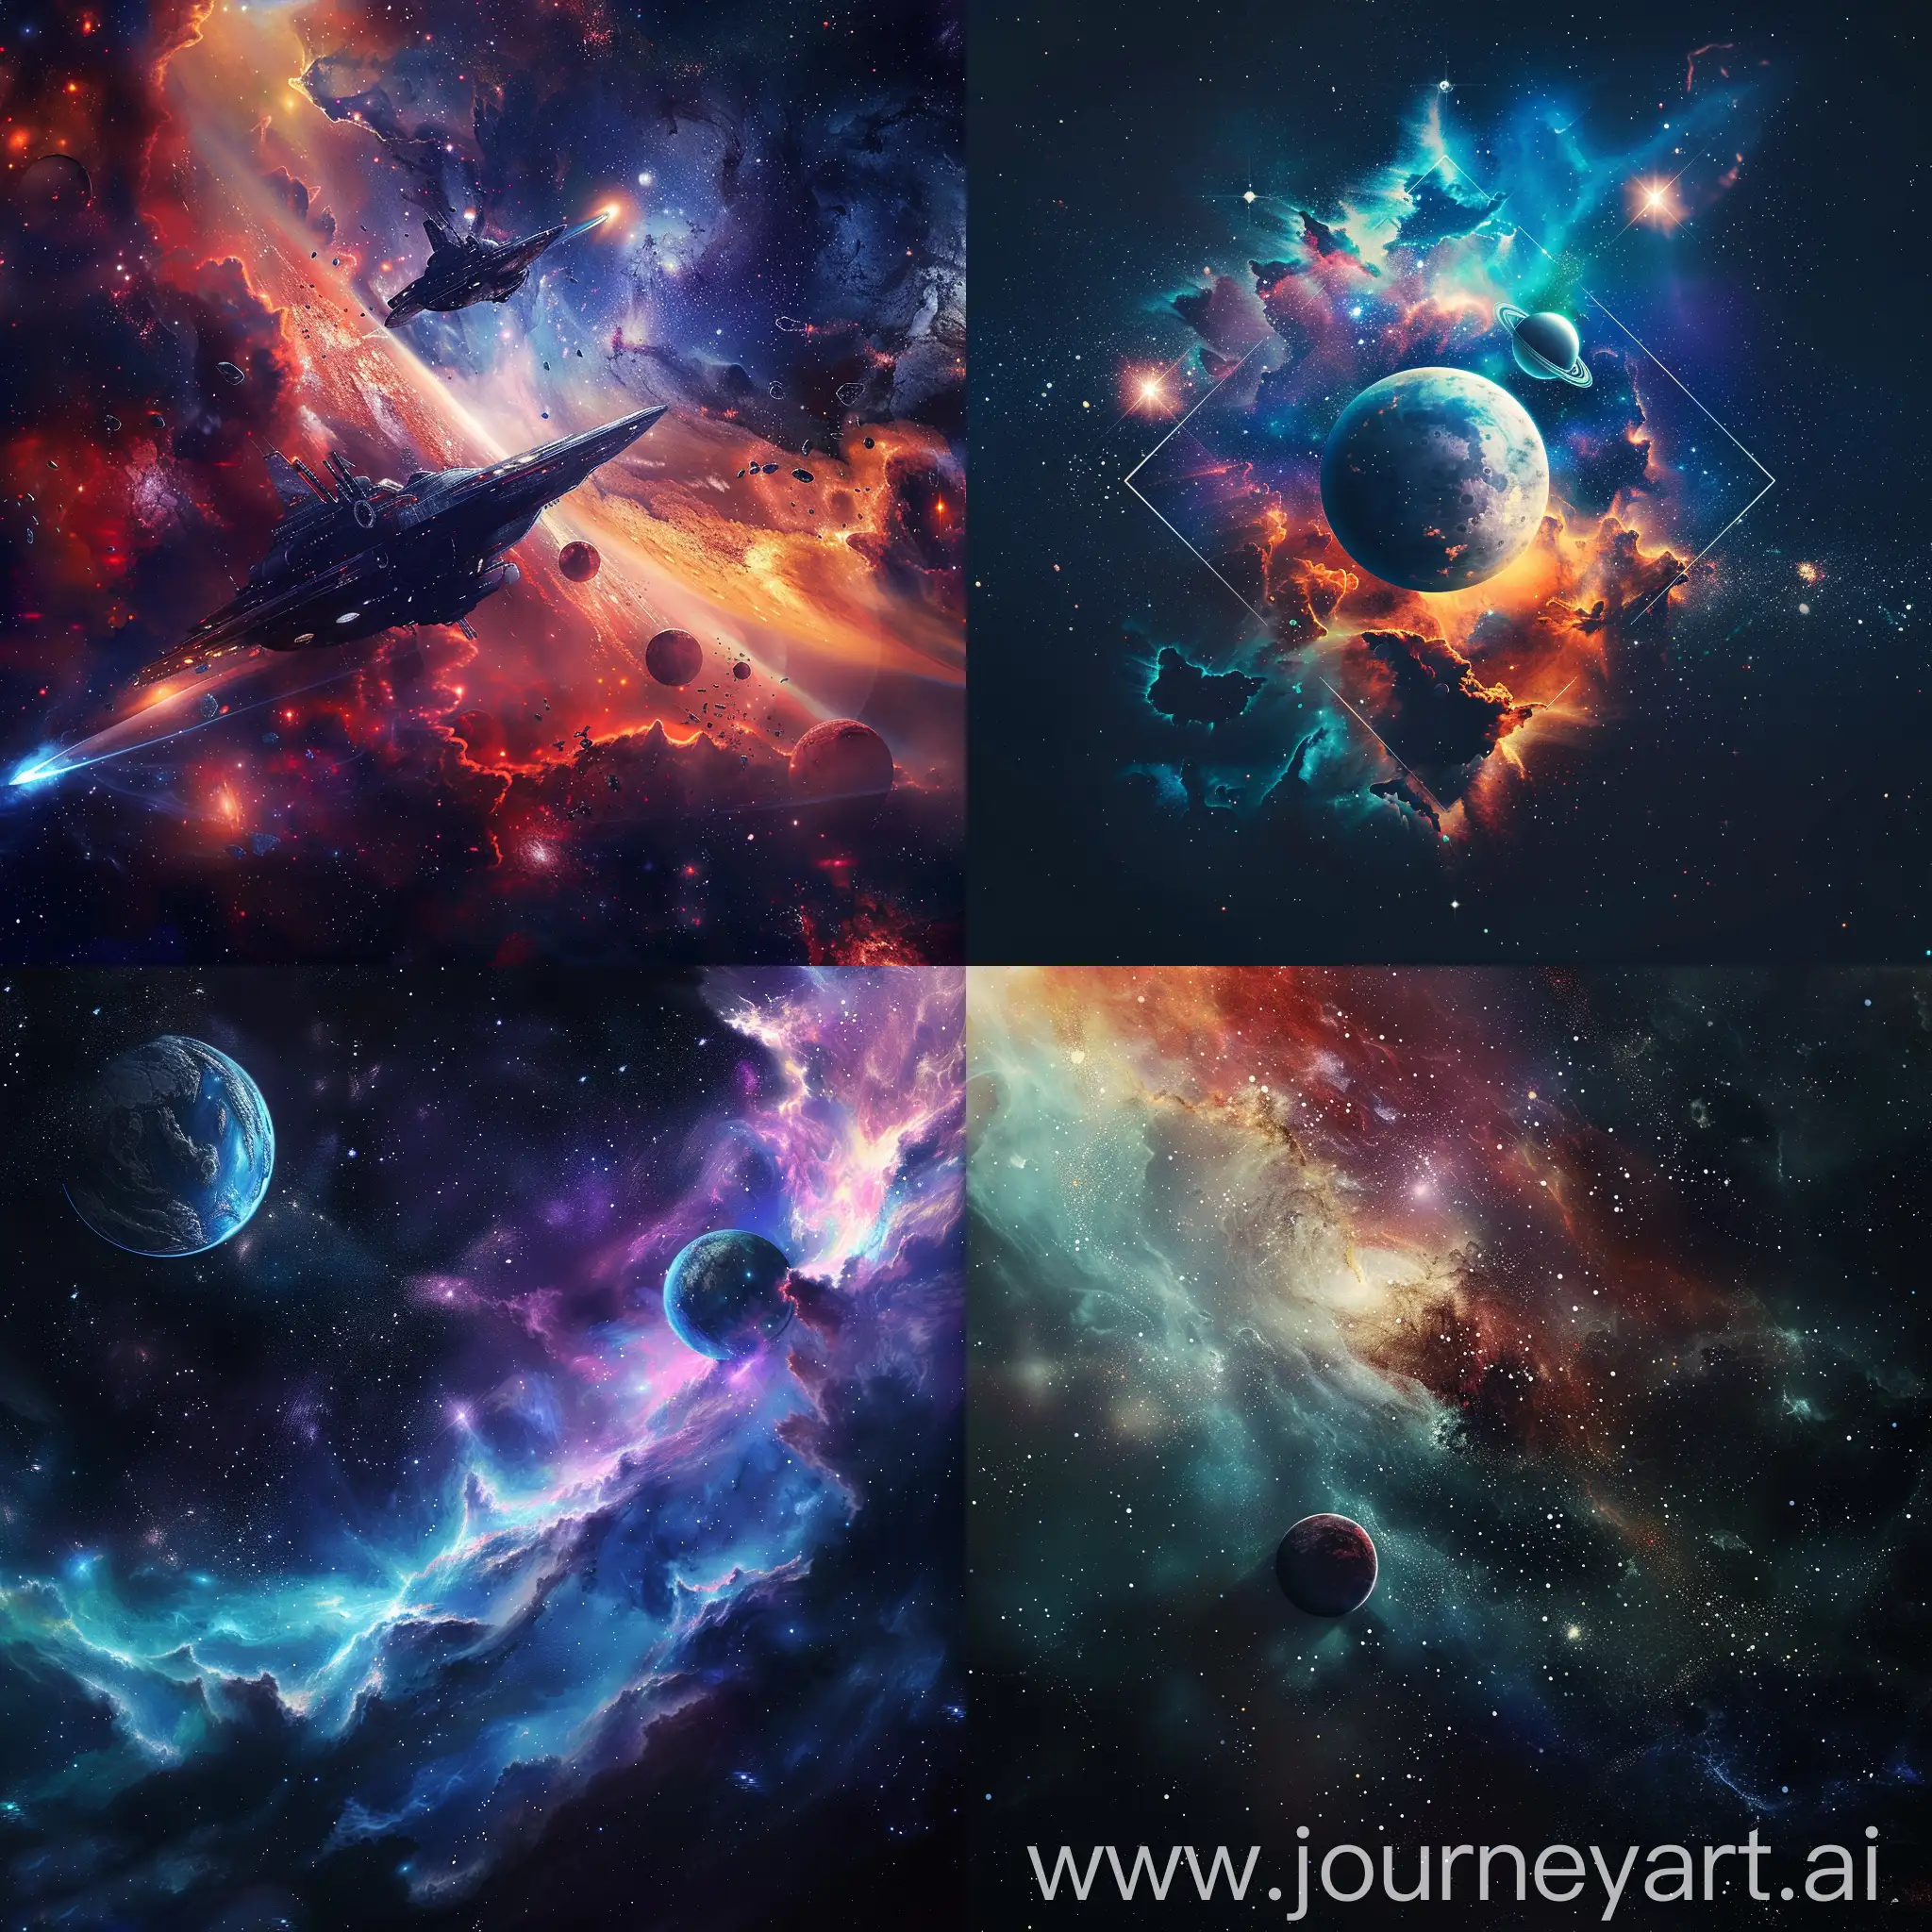 make me a header for my YouTube profile on a space theme with a resolution of 2048 x 1152 pixels